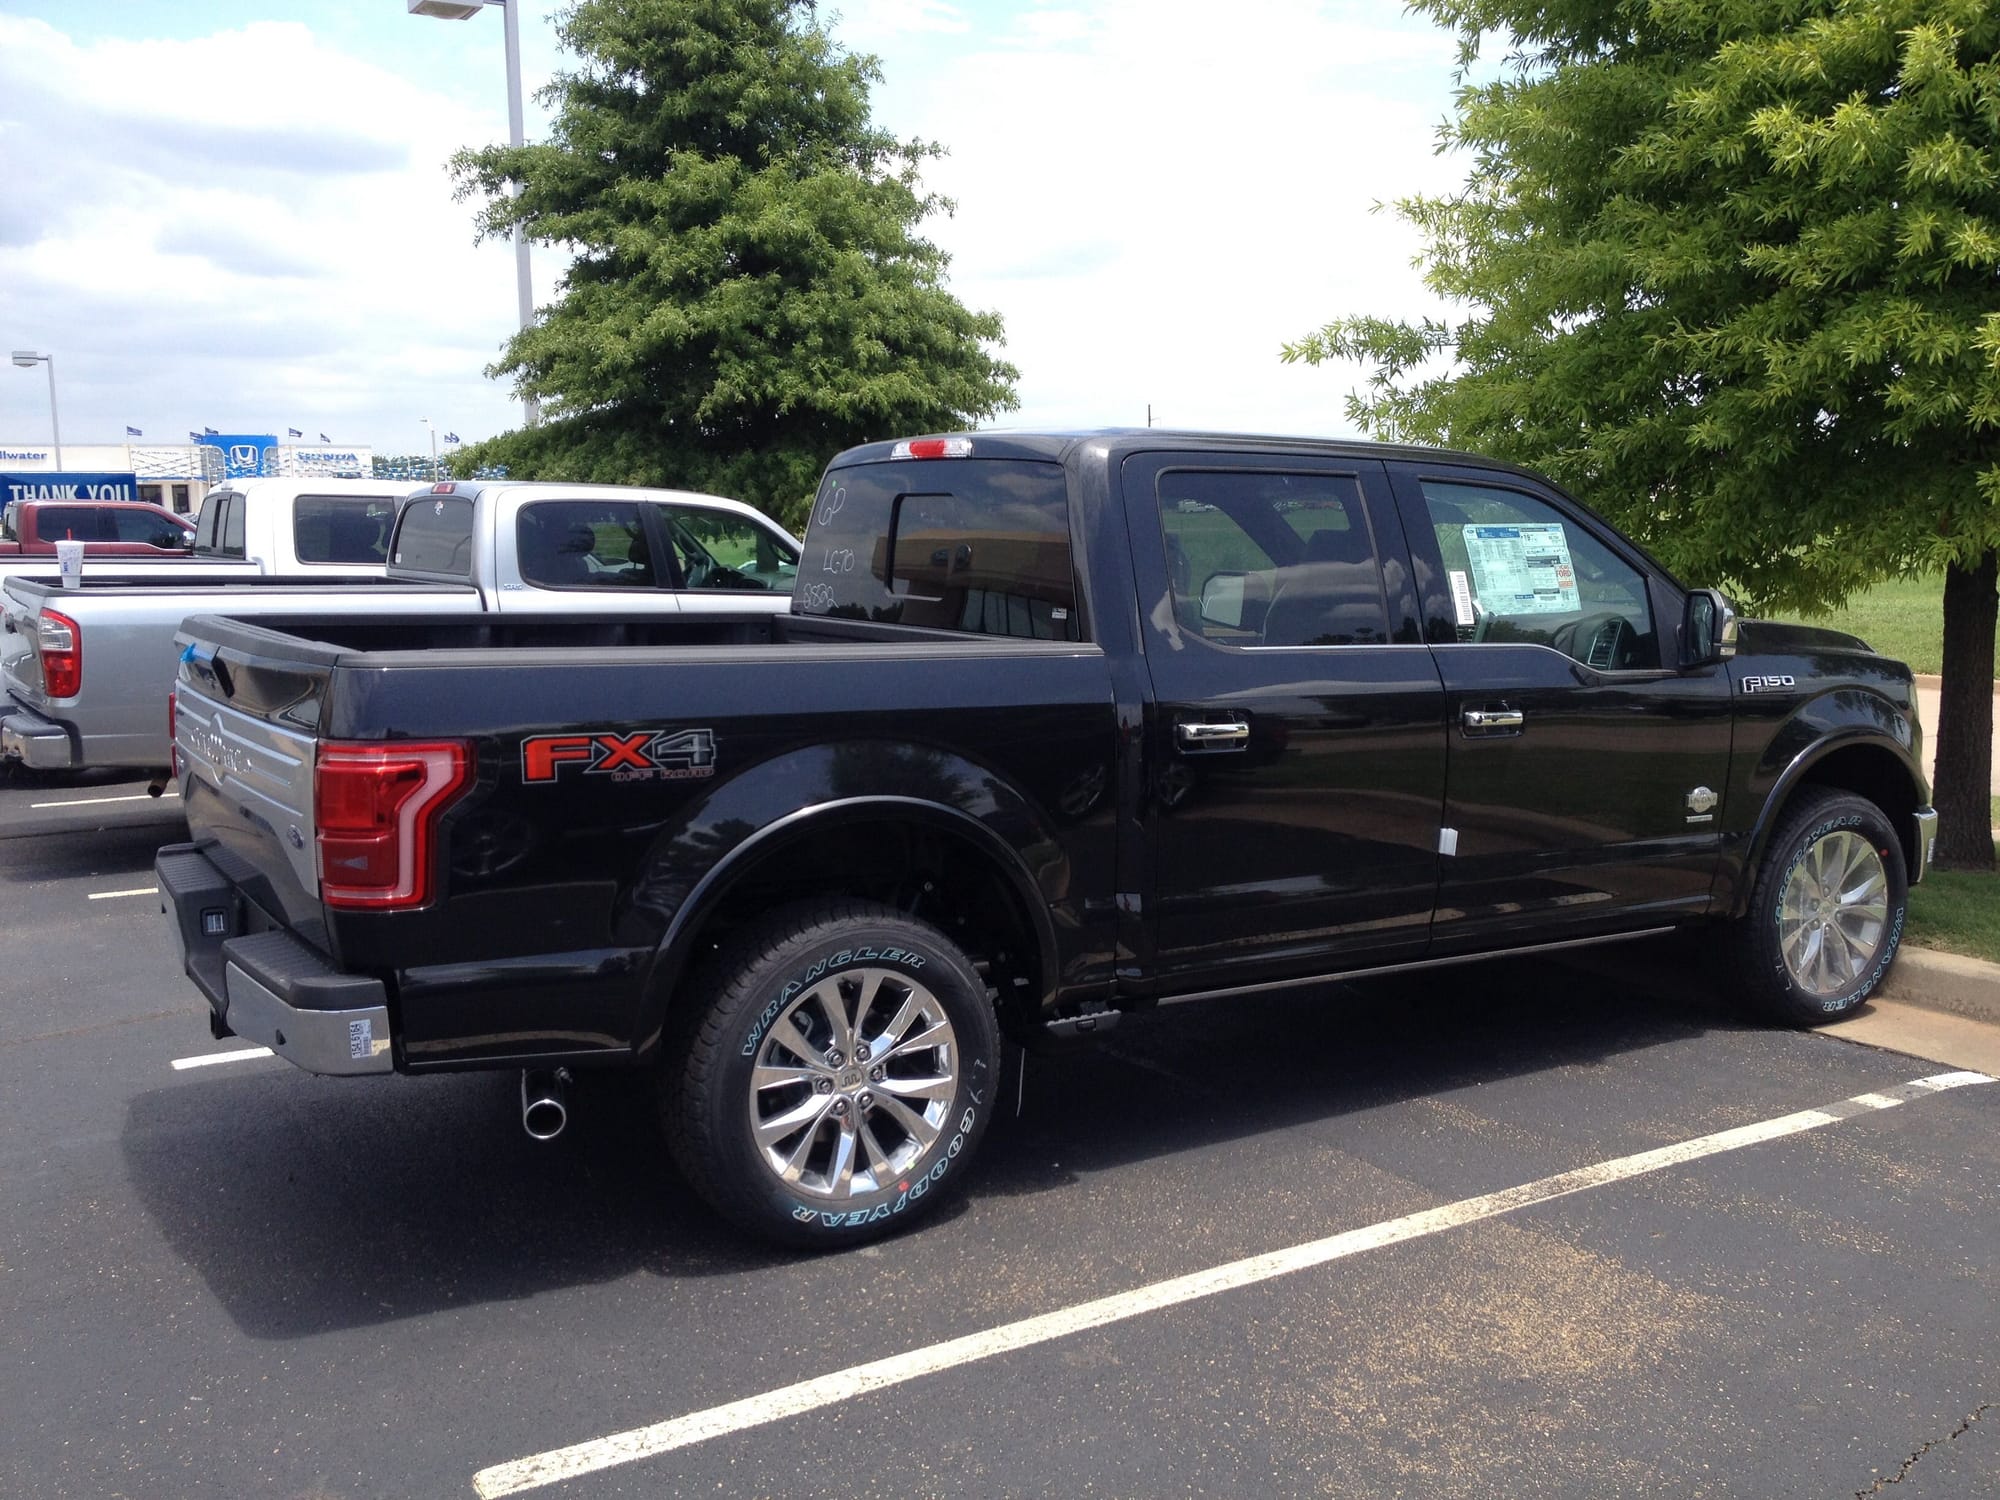 Ford f250 build date by vin #9